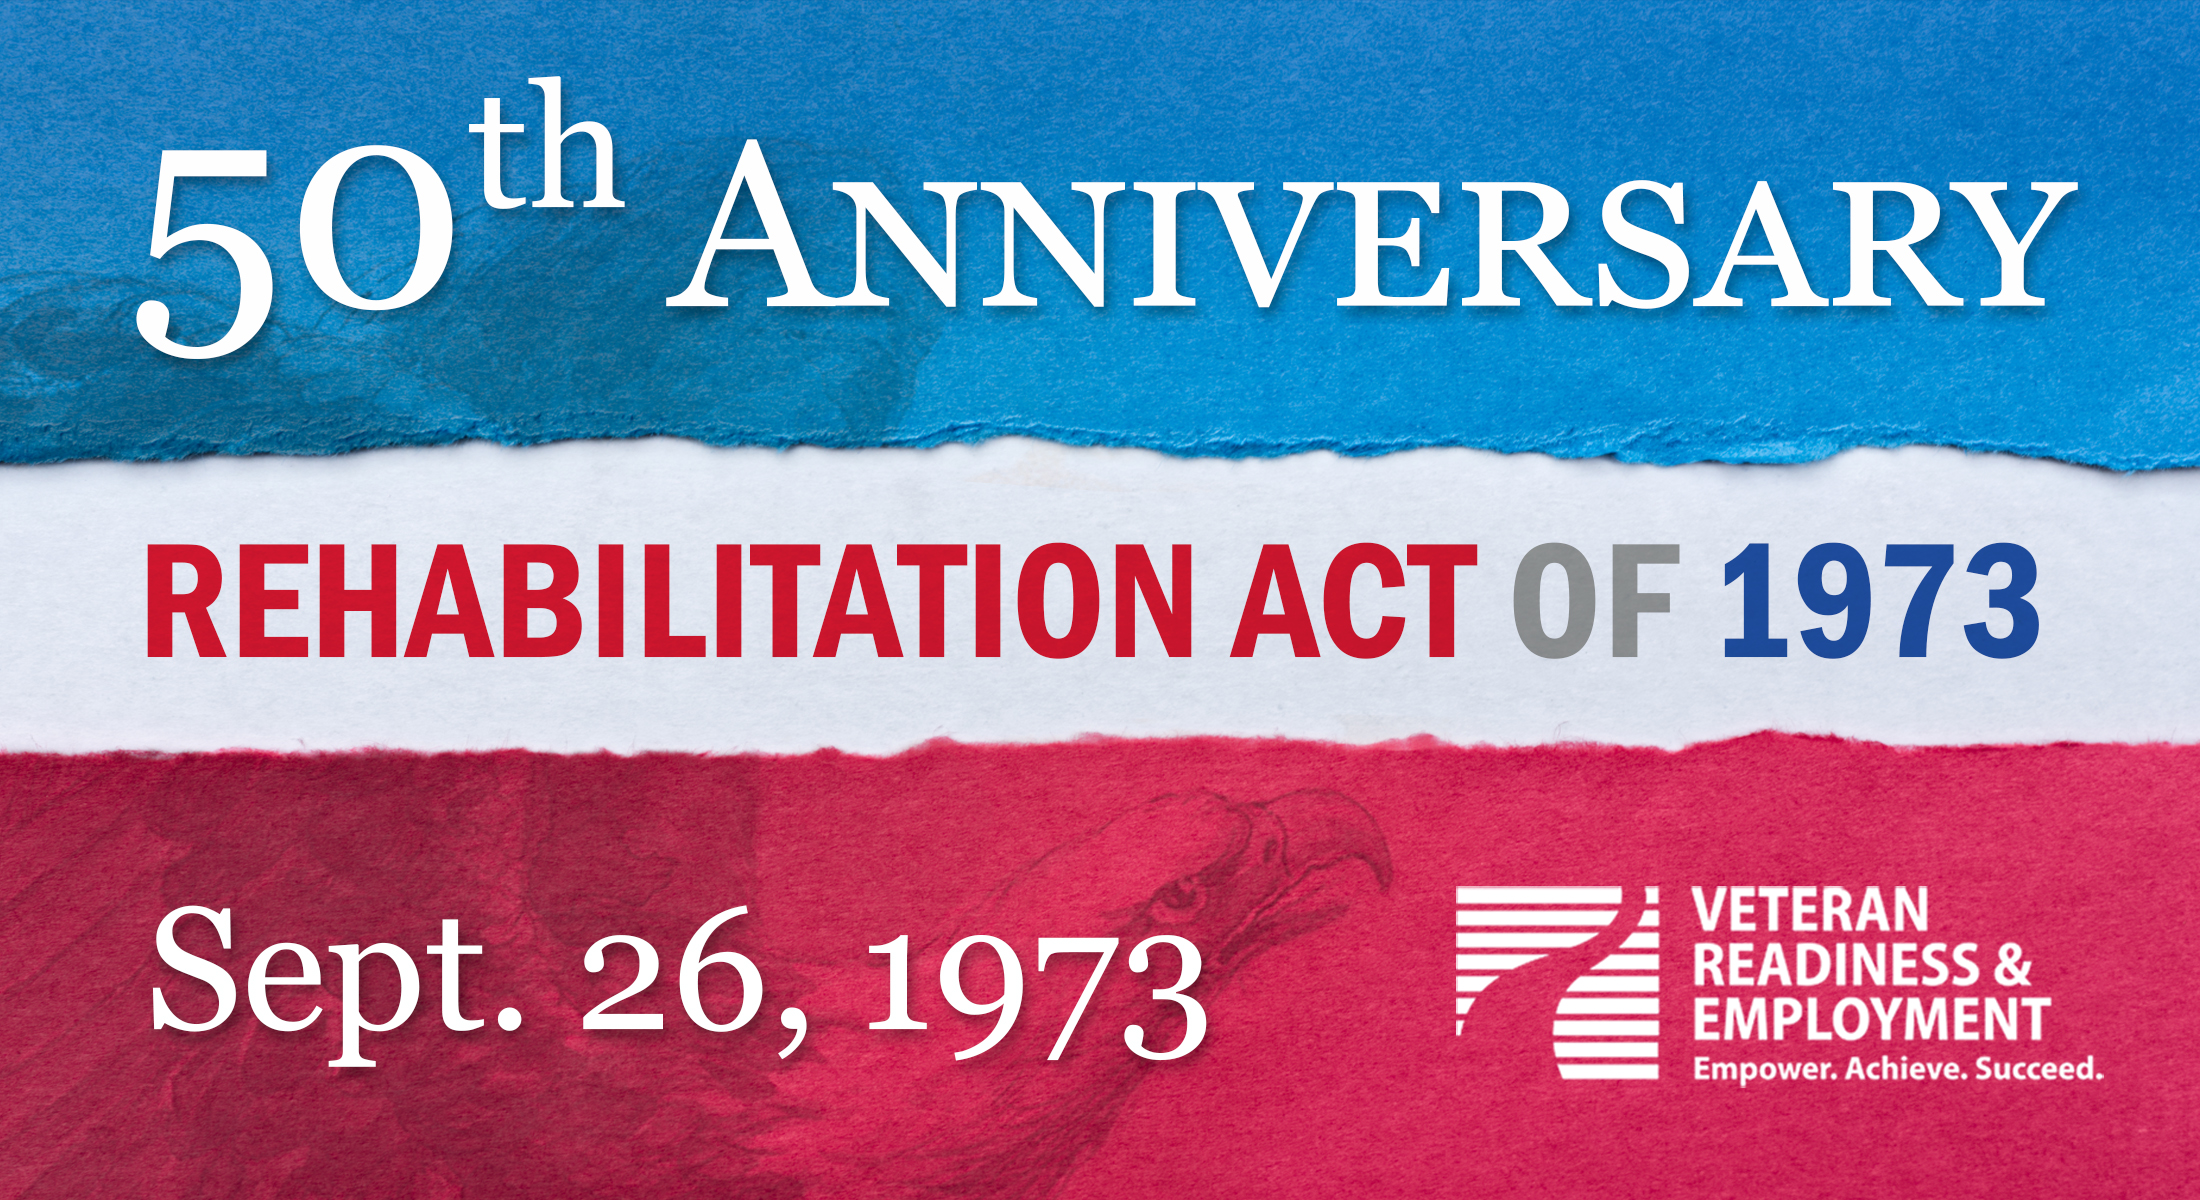 50th Anniversary of the Rehabilitation Act of 1973